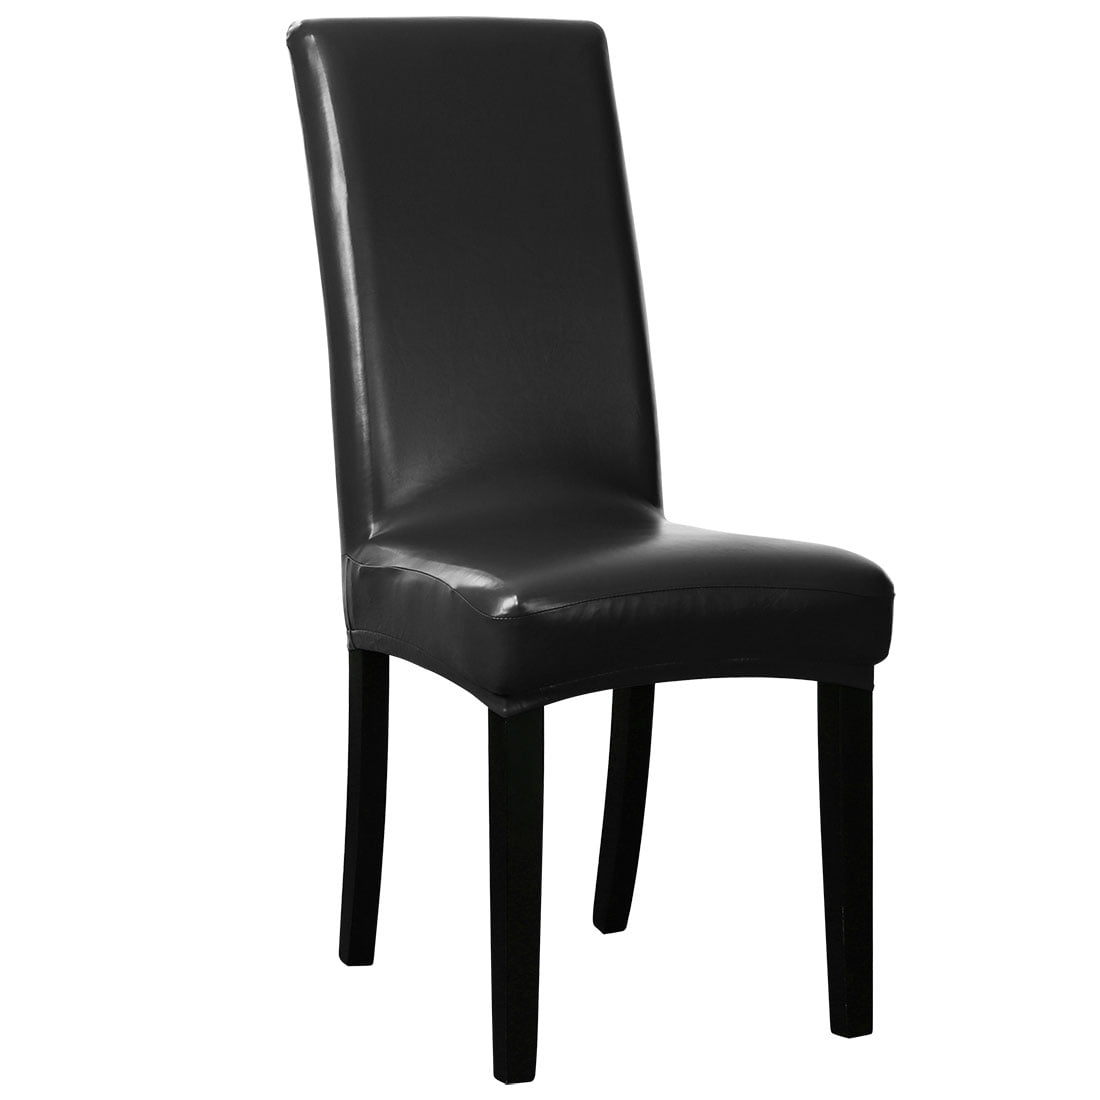 Minimalist Leather Chair Covers Black for Small Space